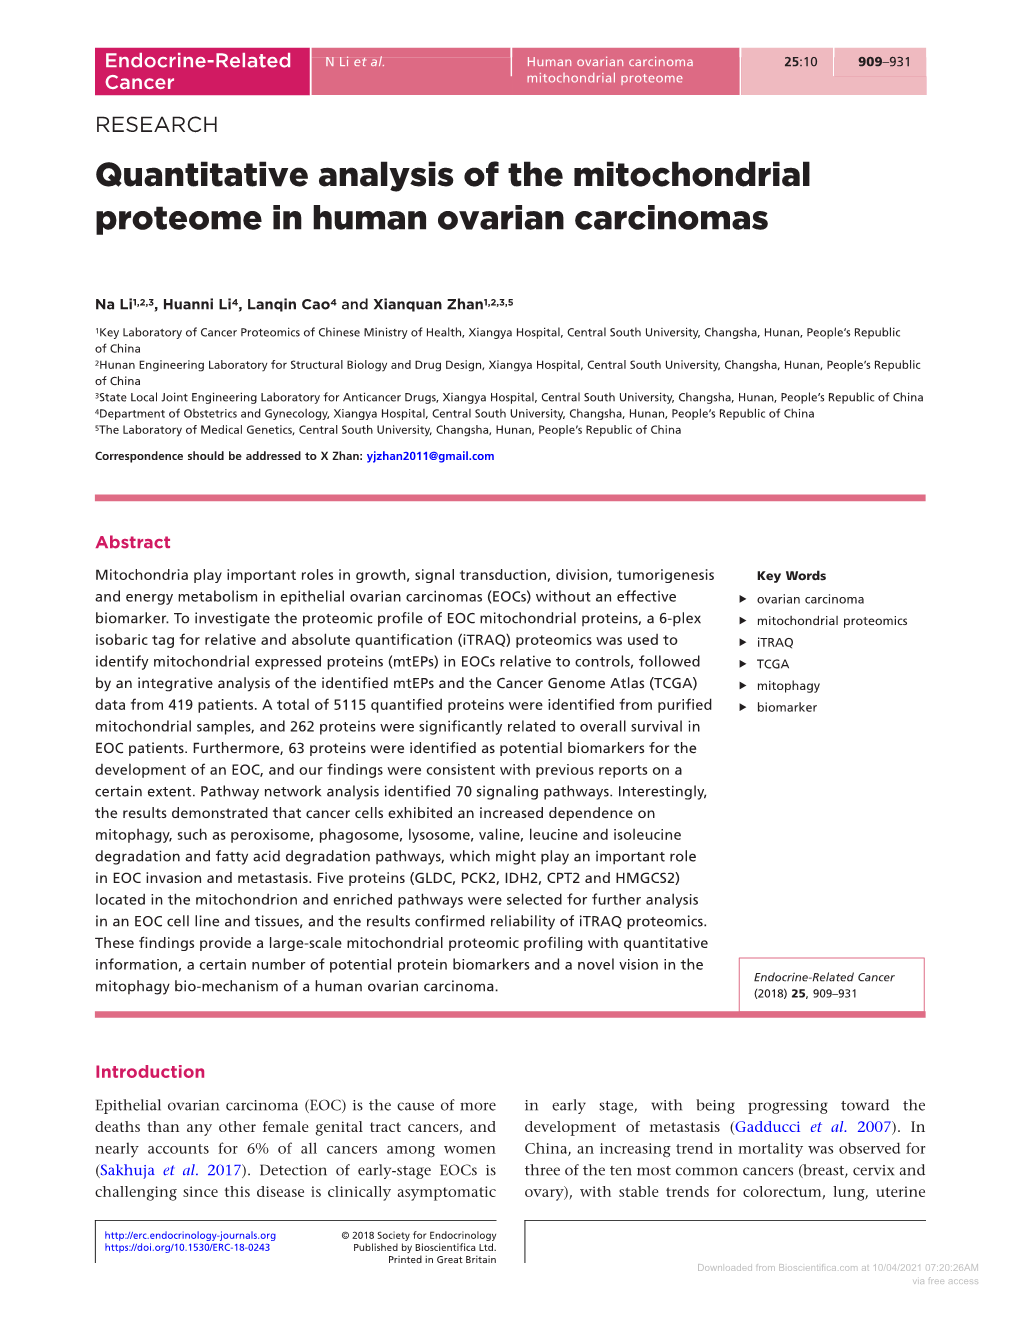 Quantitative Analysis of the Mitochondrial Proteome in Human Ovarian Carcinomas